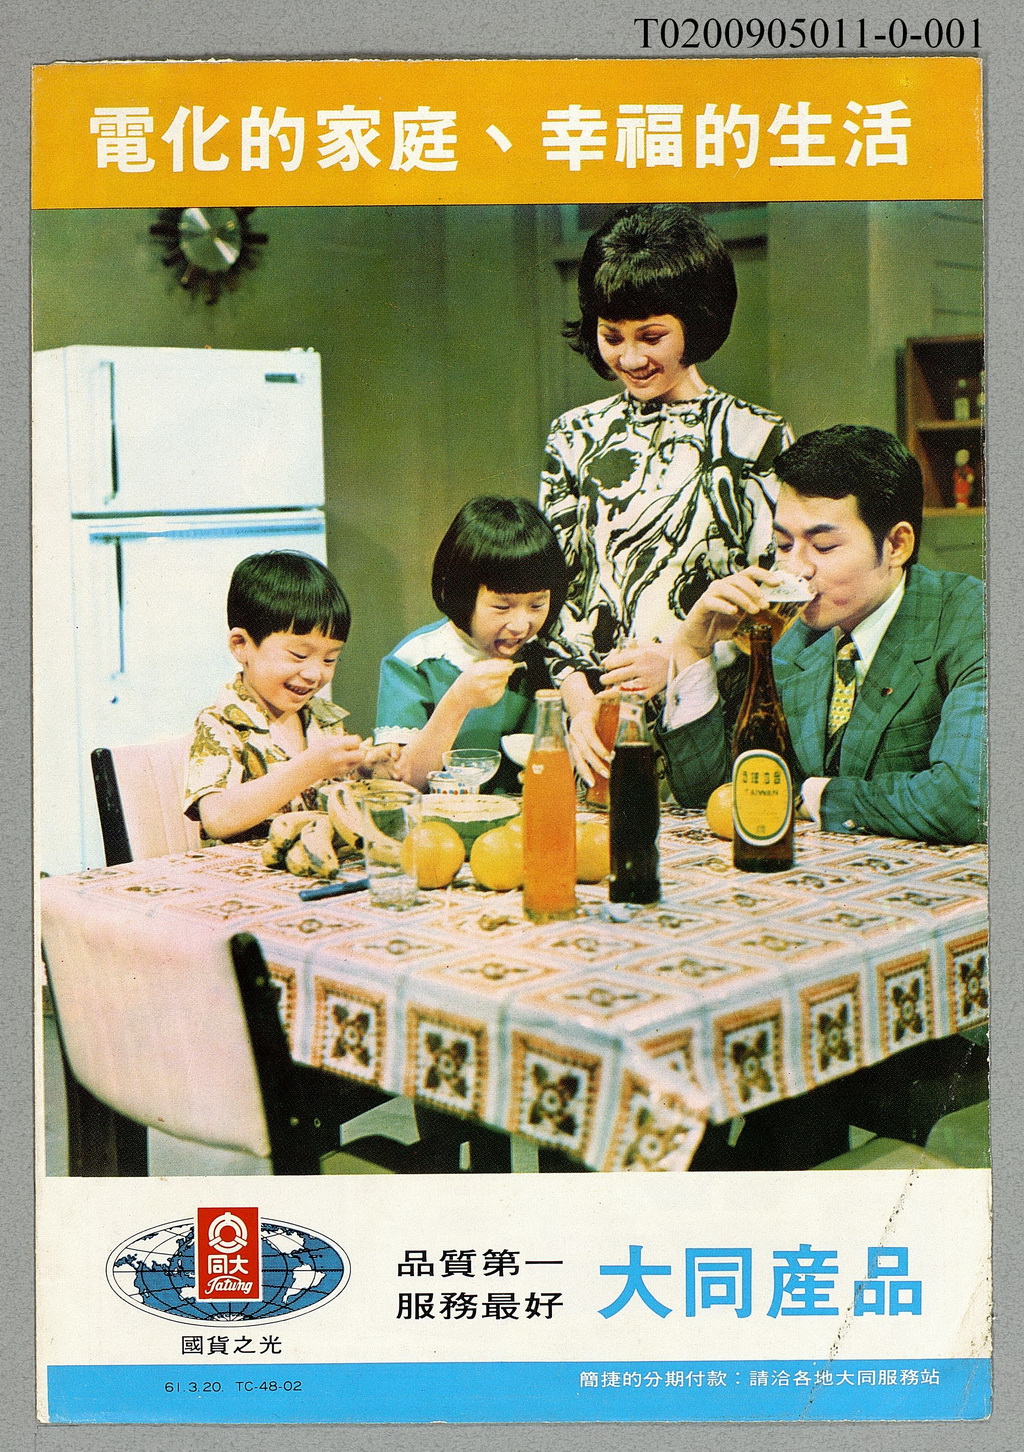 The 1972 Catalogue of Tatung Products